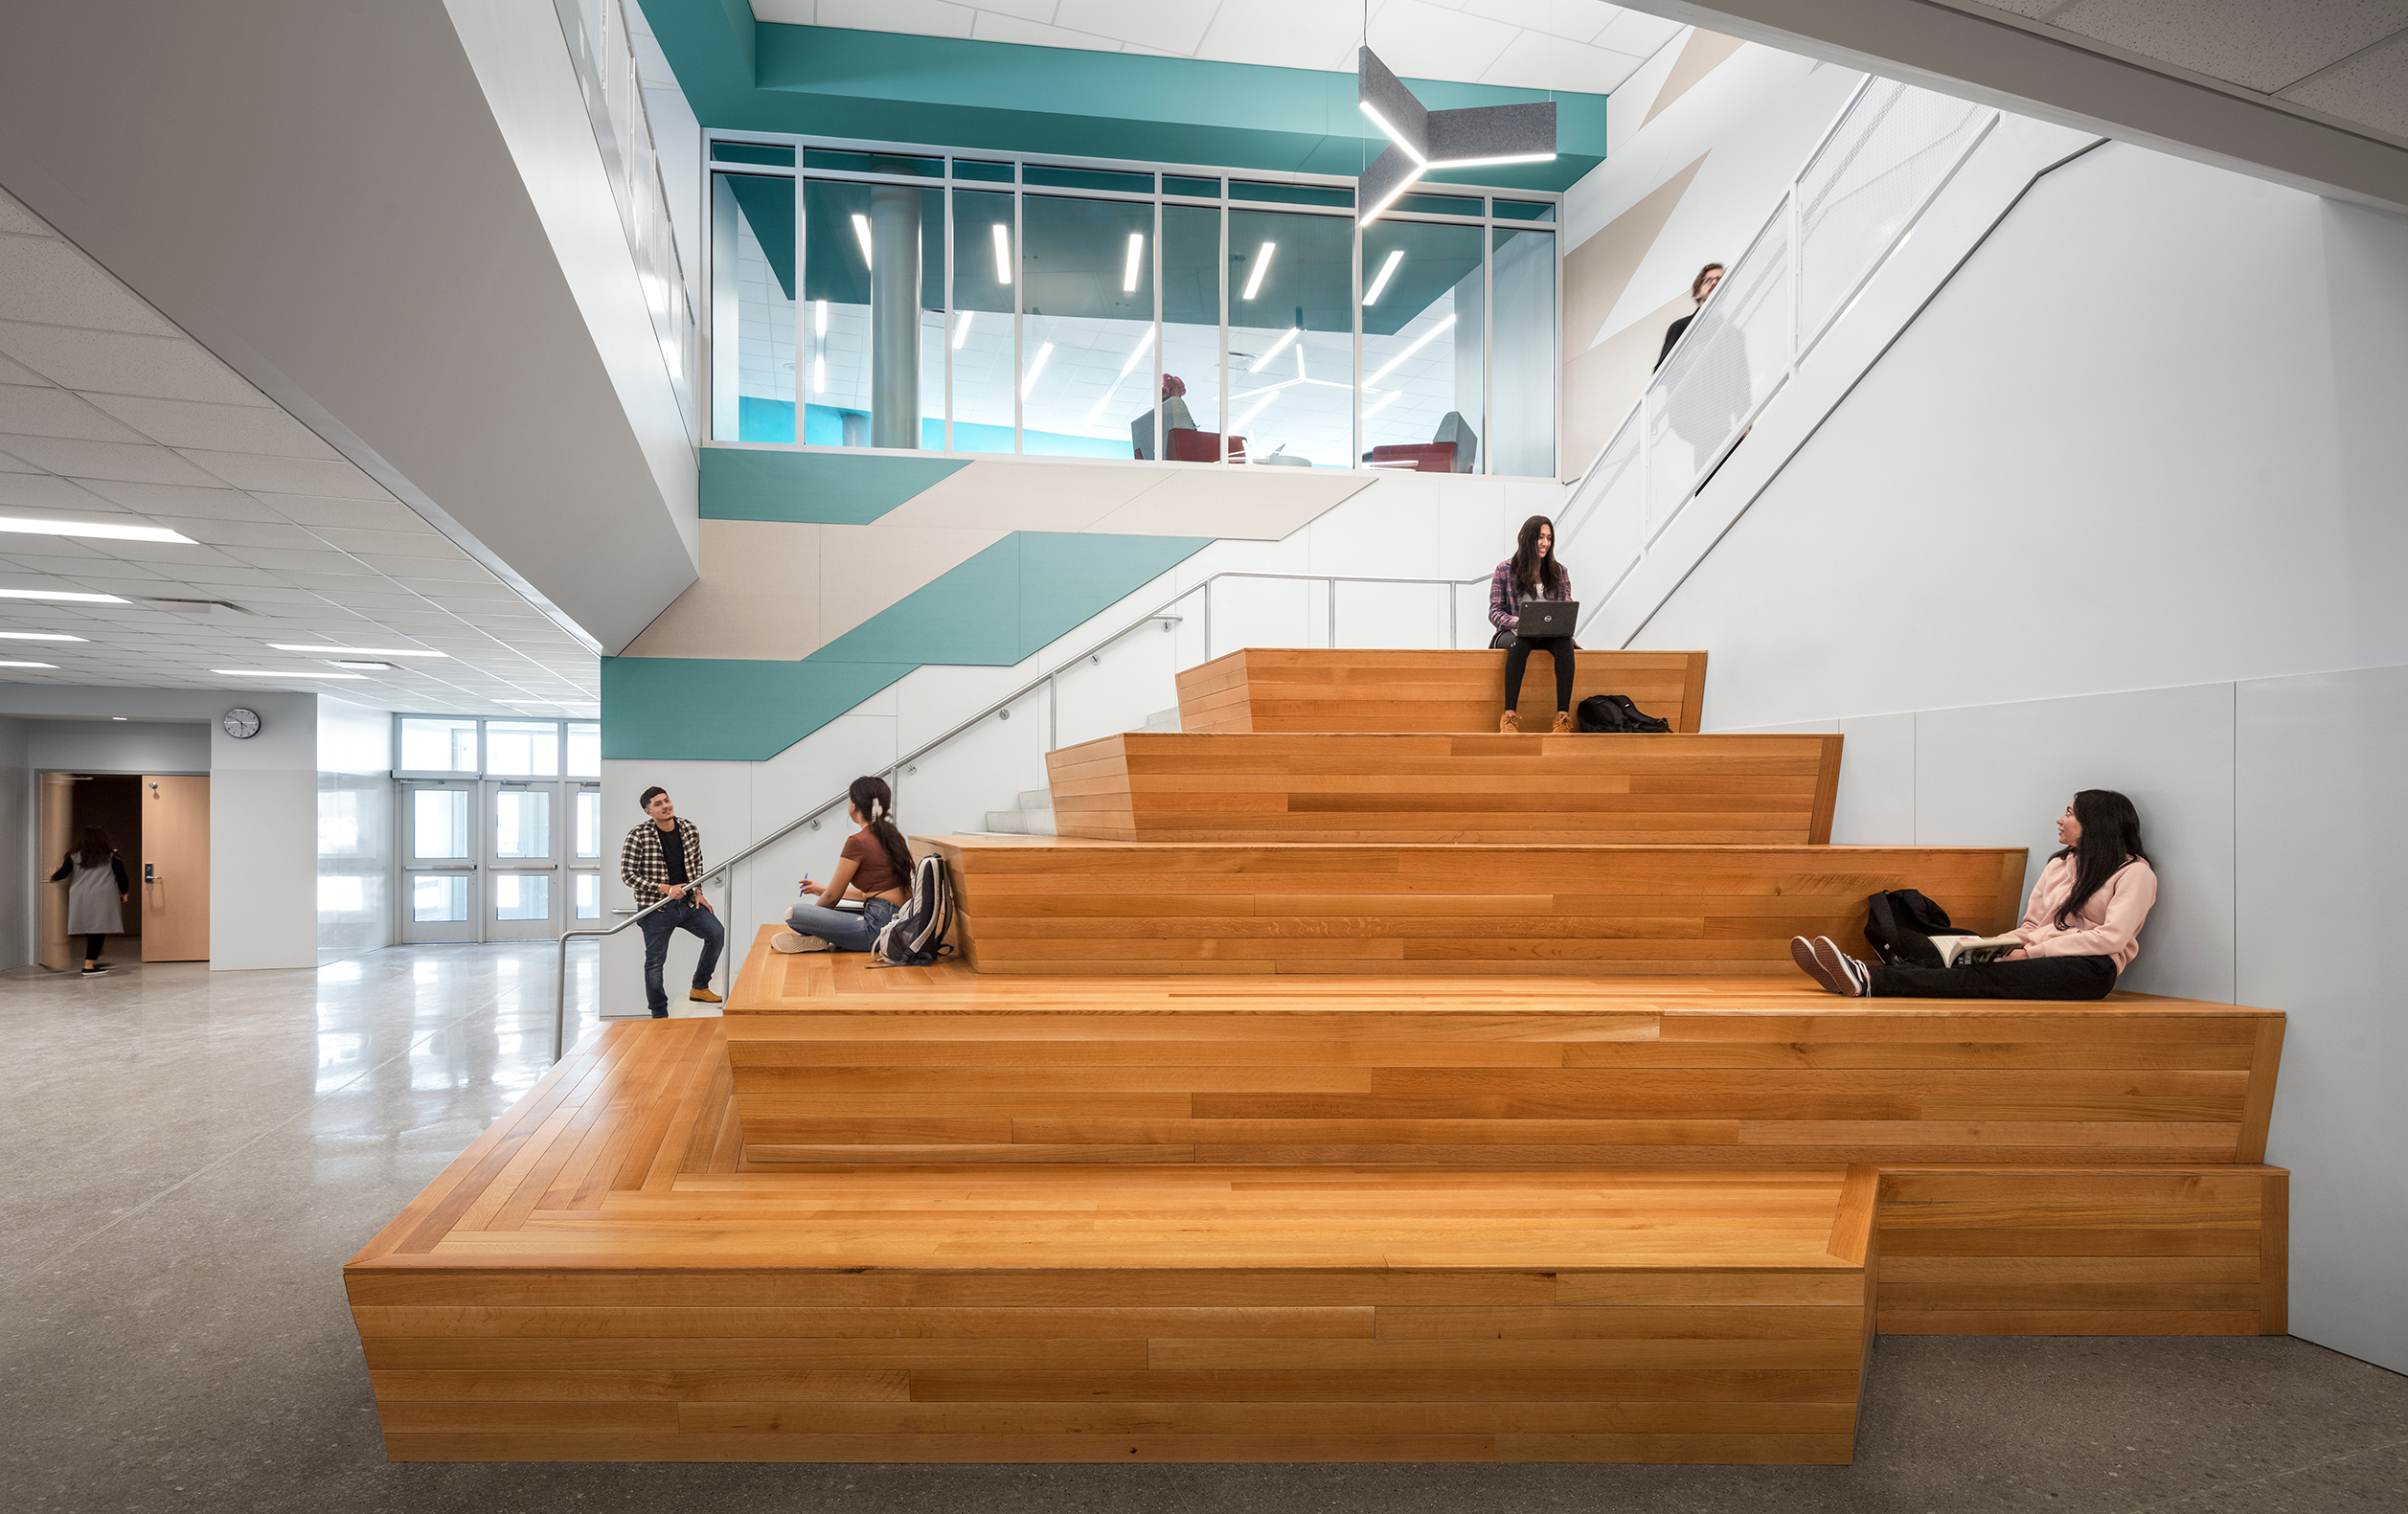 Students interacting on wooden staircase that leads to library